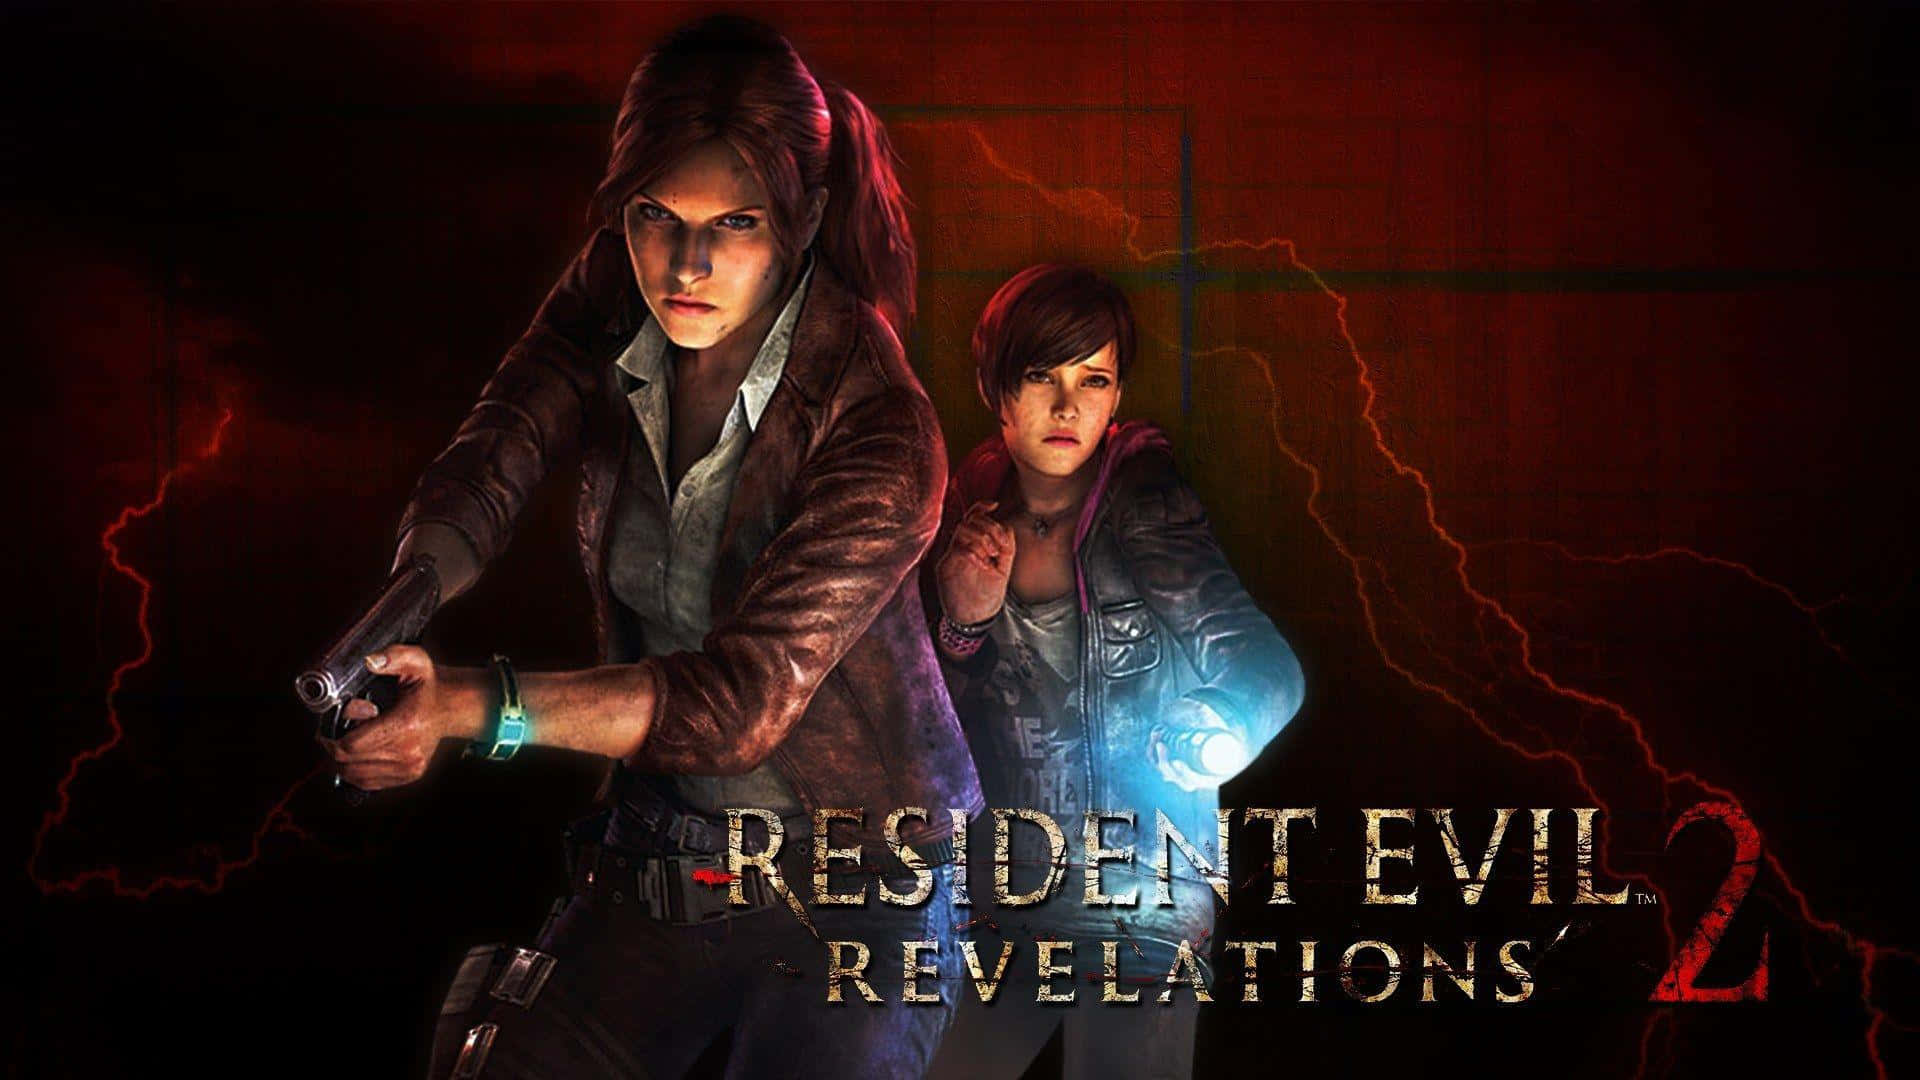 Uncover Unknown Fear in Resident Evil Revelations 2 Wallpaper